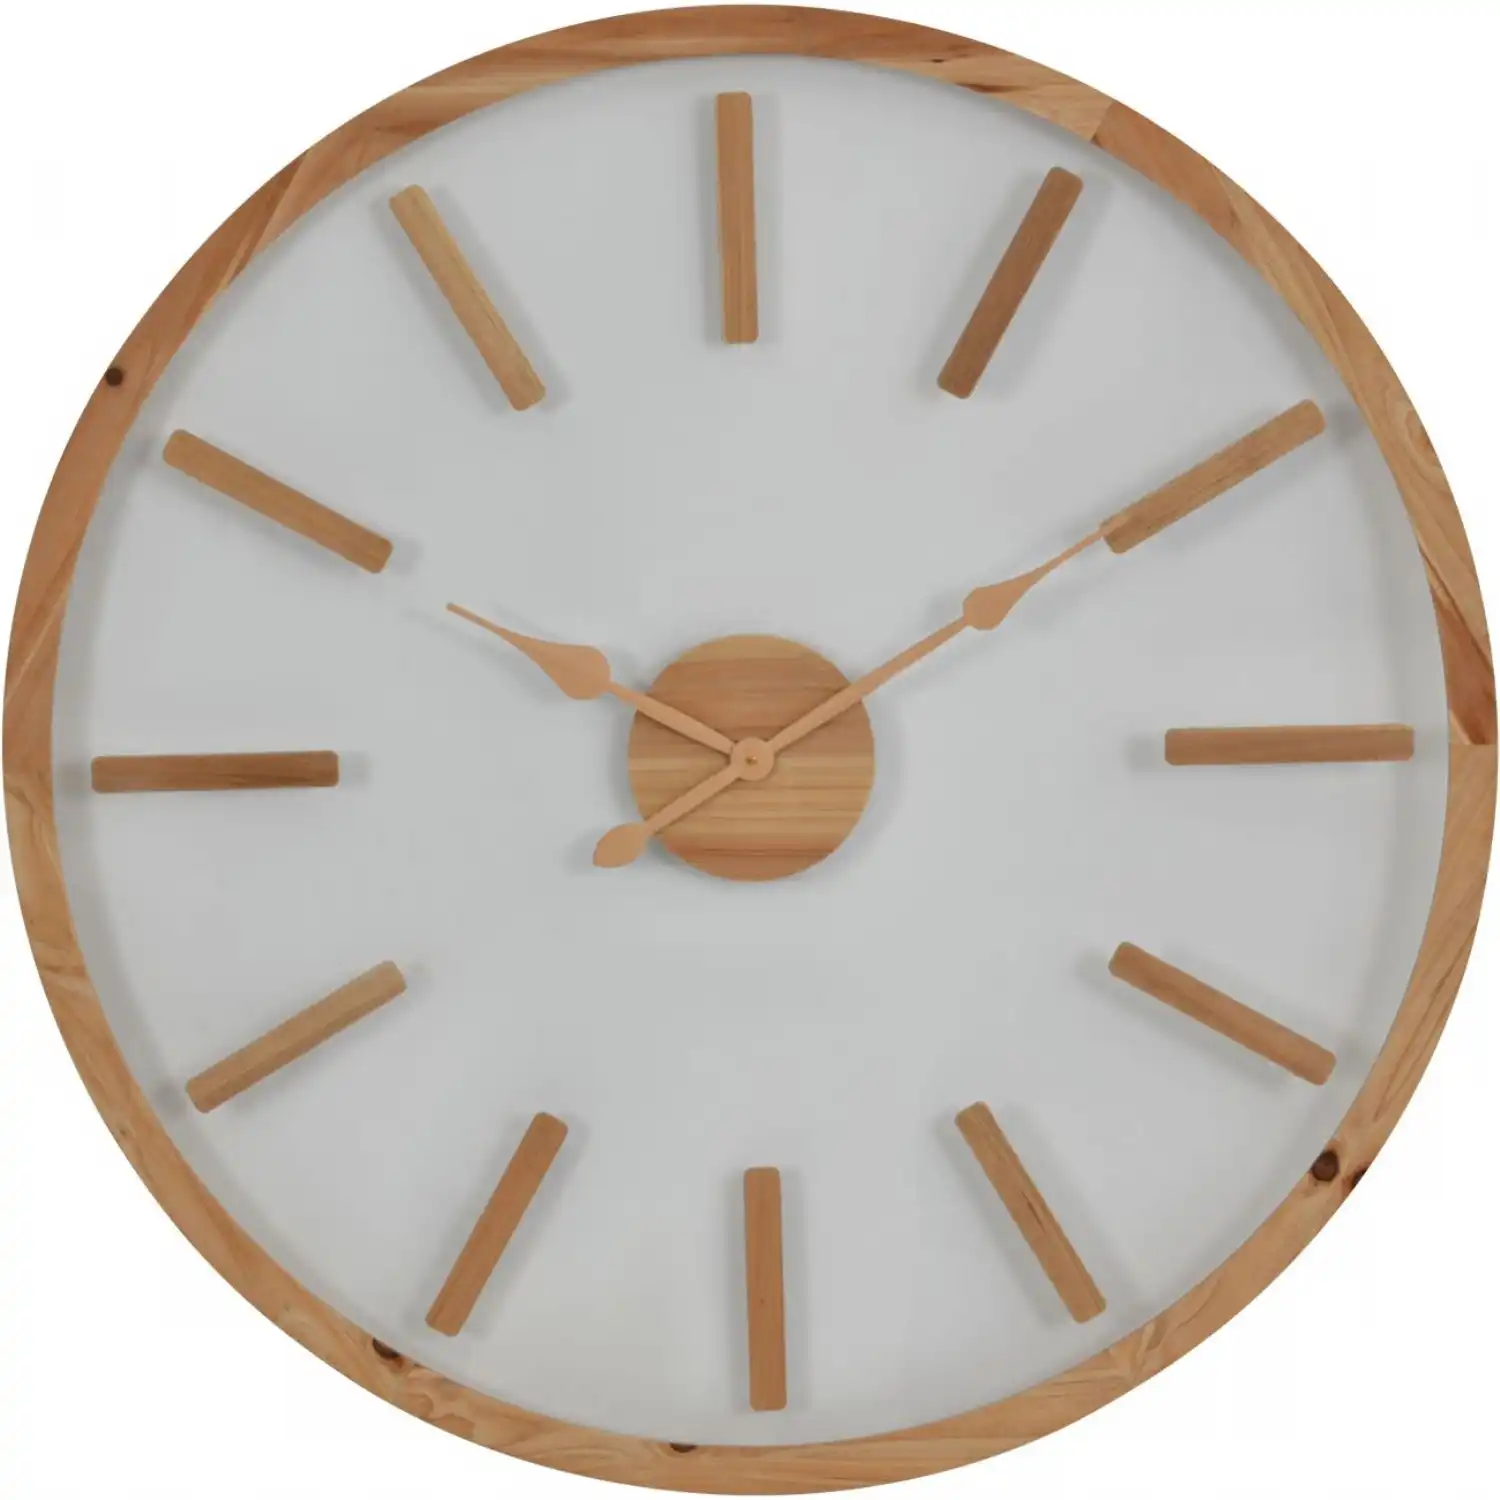 Floating Natural Wooden Round Wall Clock 100cm